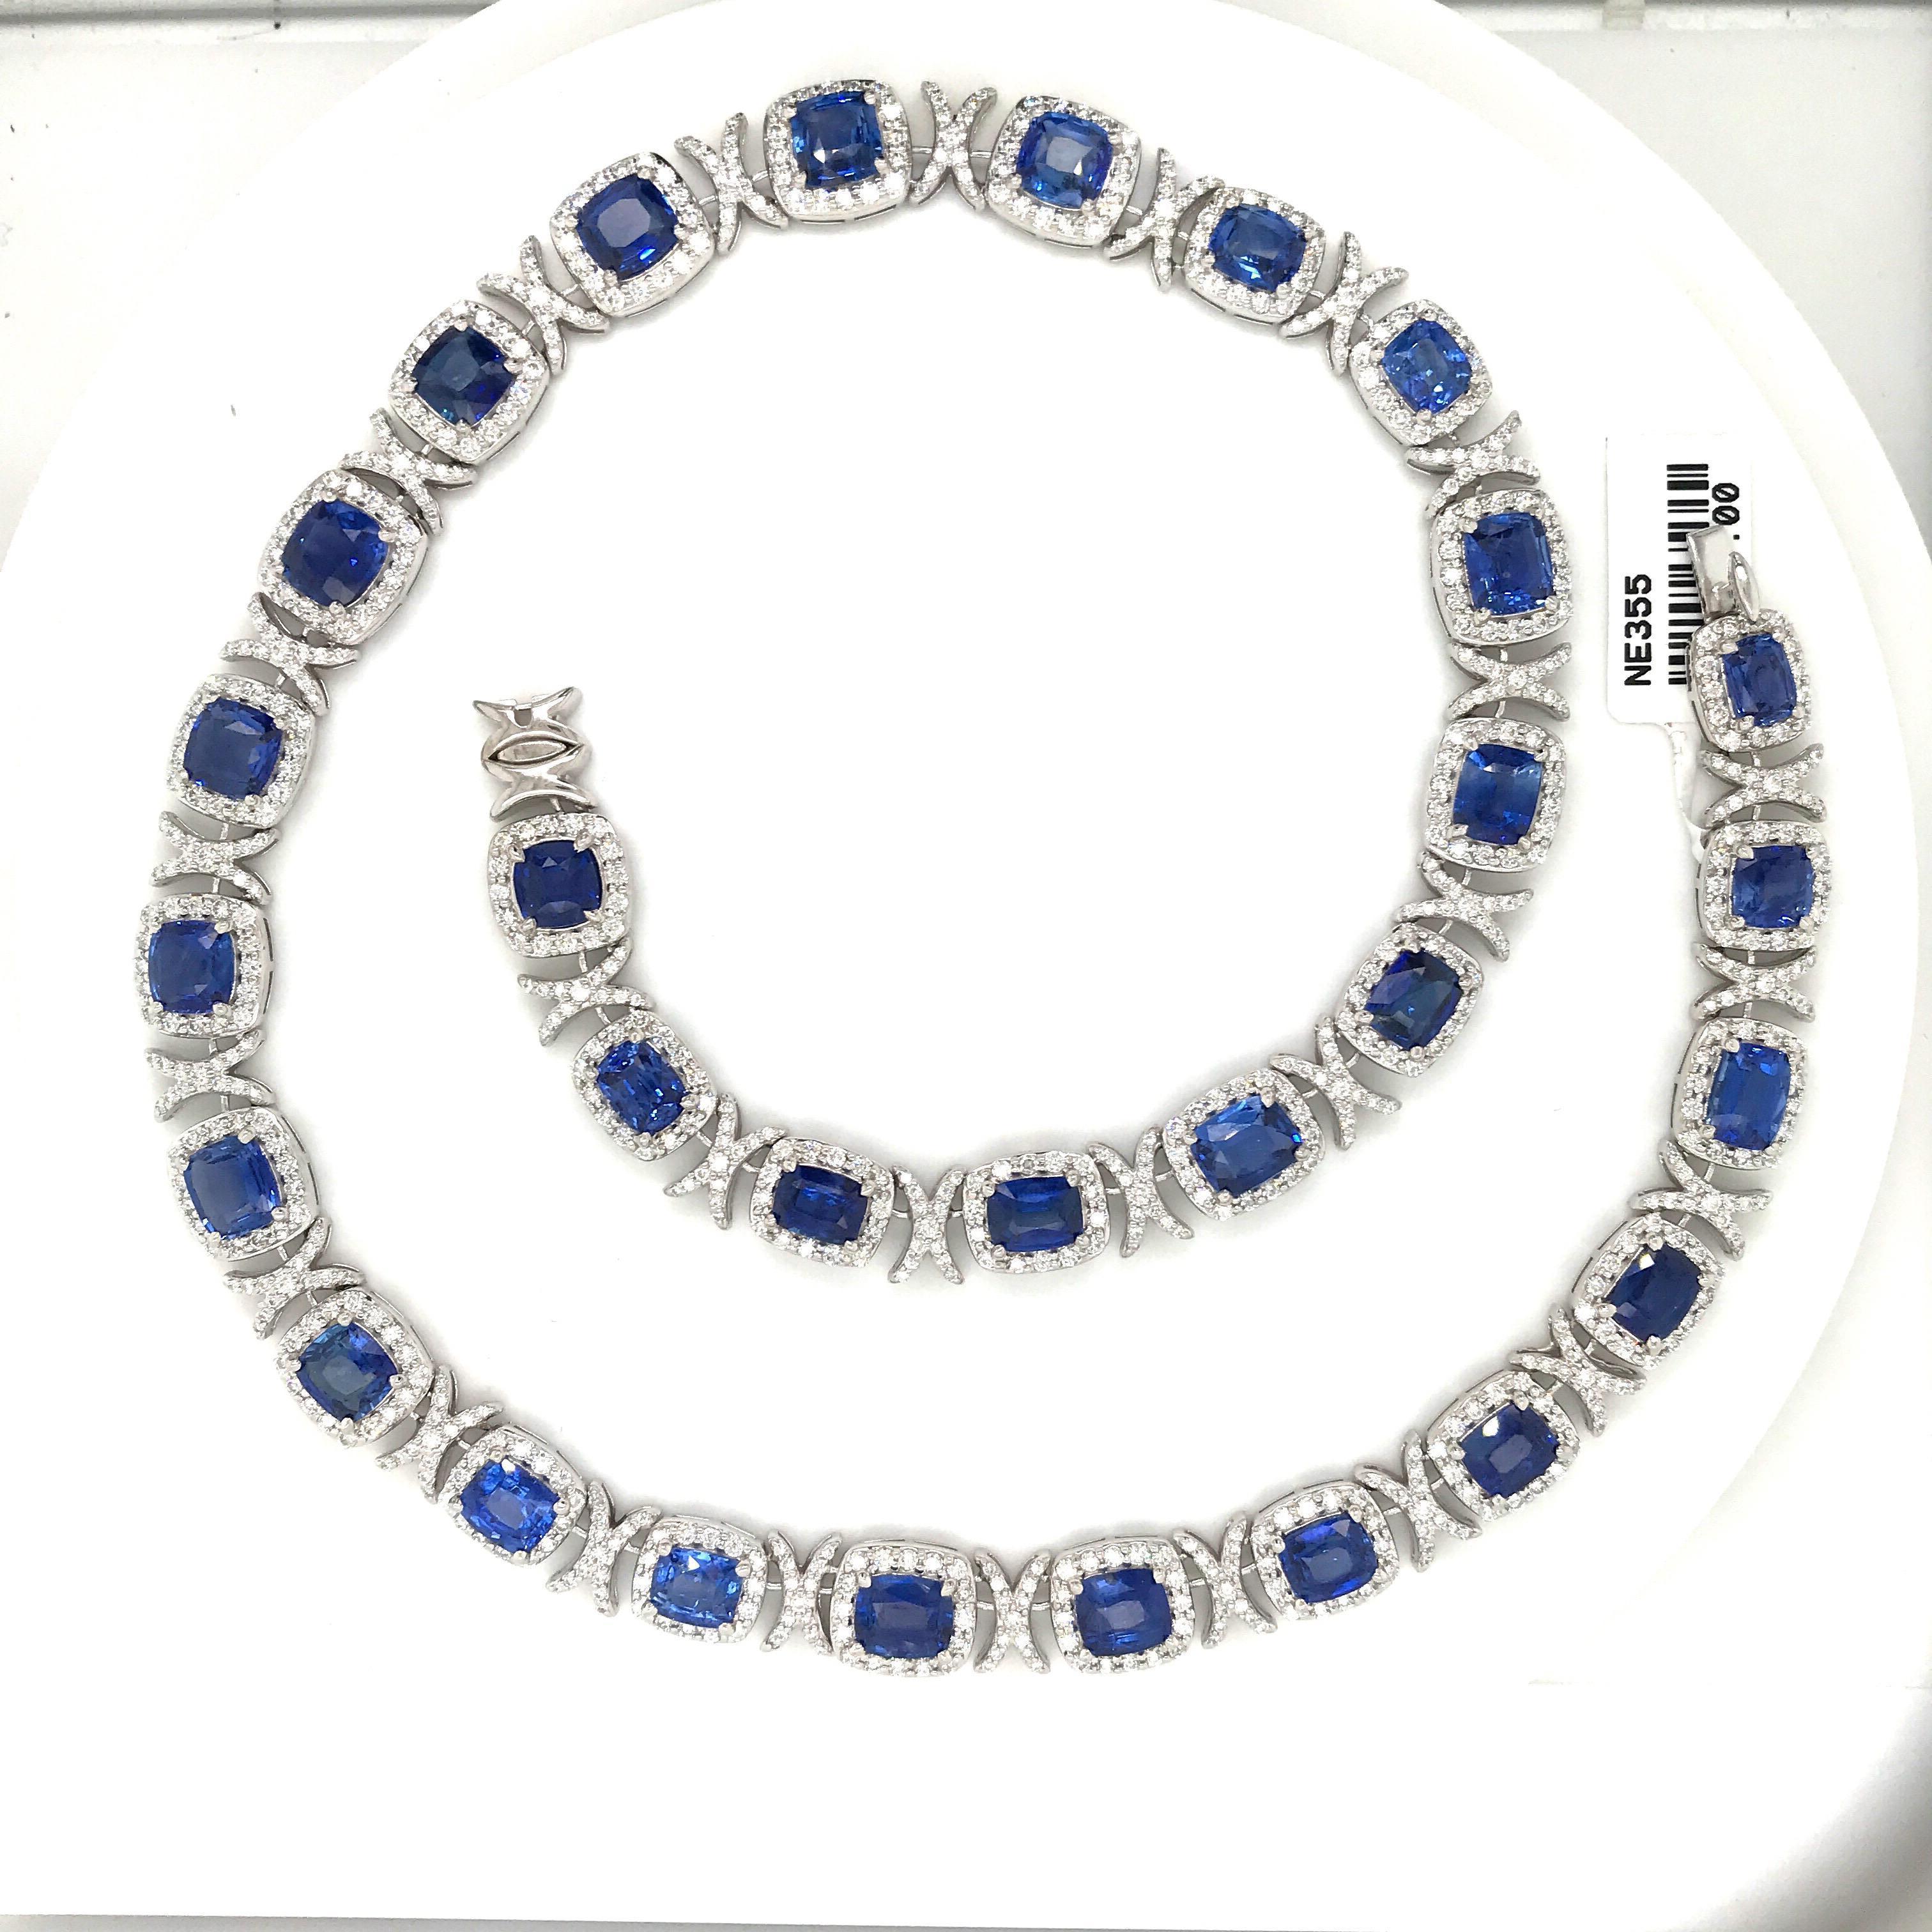 18K White gold 'XO' necklace featuring 19 cushion cut blue Sapphires weighing 44.13 carats flanked with 883 round brilliants weighing 11.10 carats.
Color G-H
Clarity VS
A real show stopper!!!